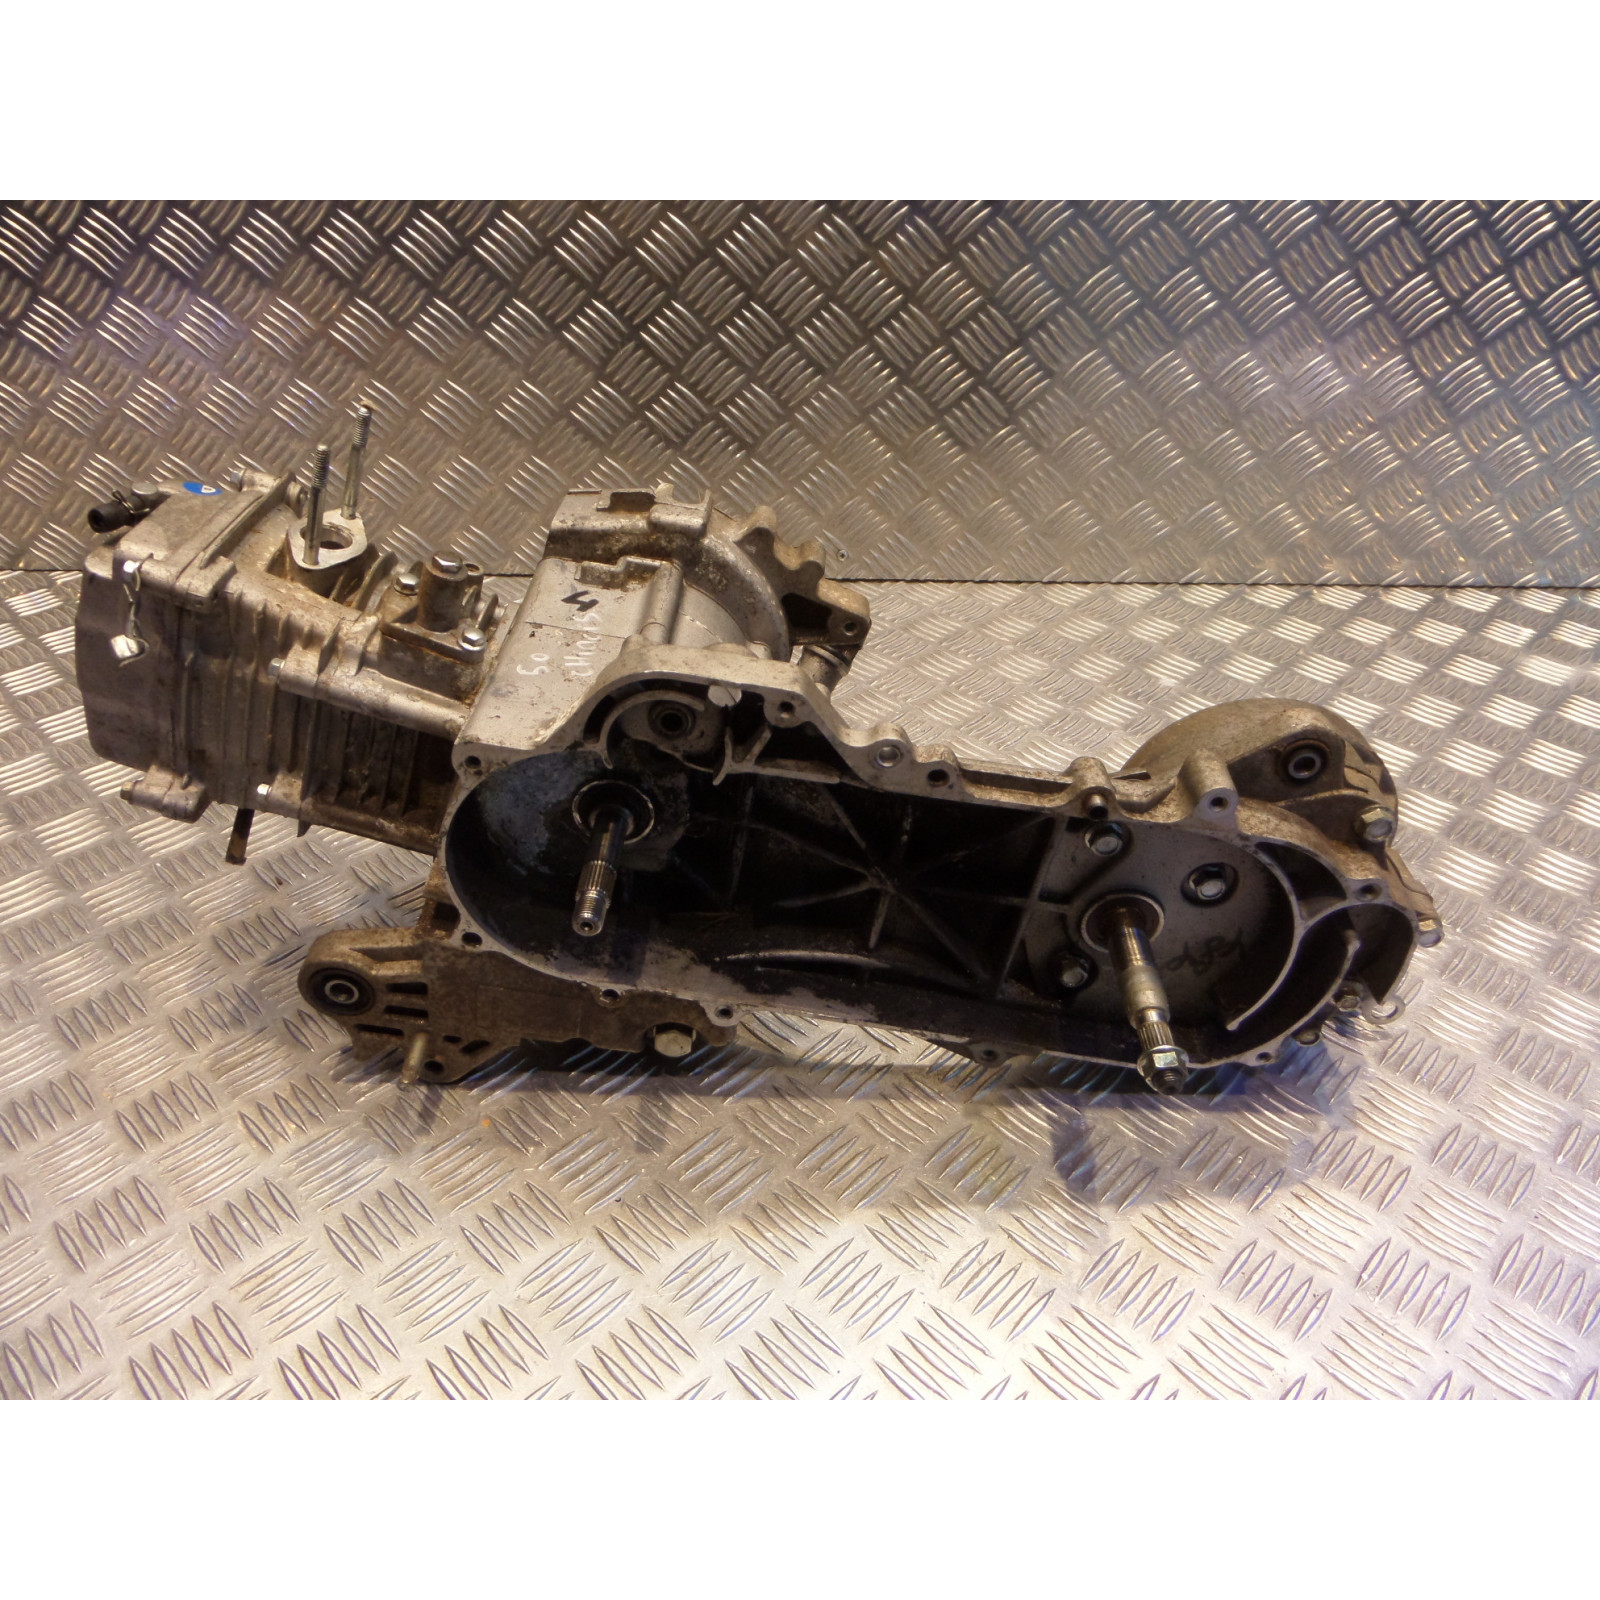 moteur scooter chinois 50 gy6 4 temps 139qma bt139qma